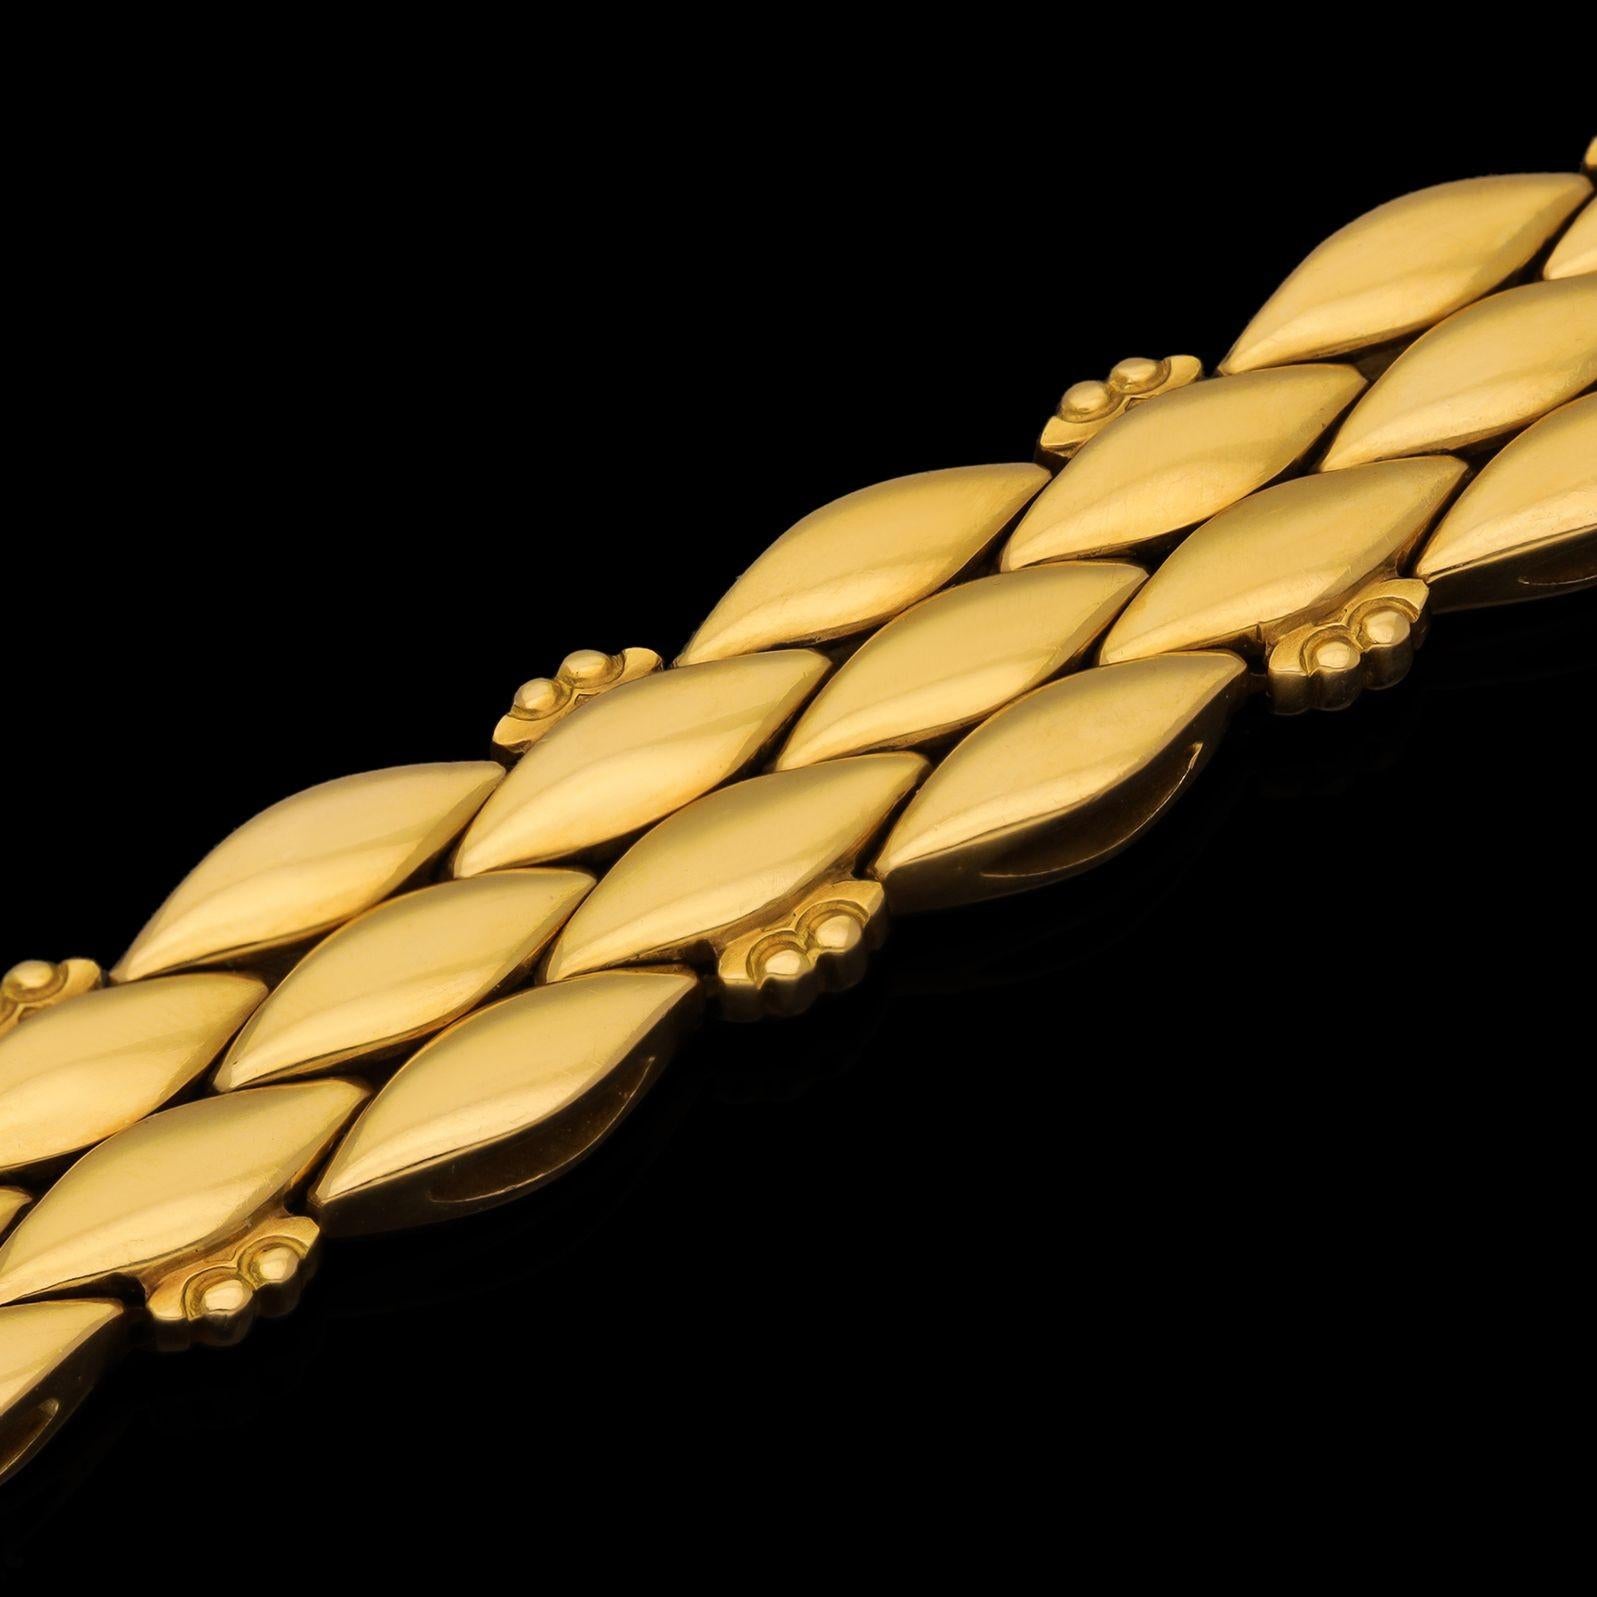 Description
An elegant 18ct gold vintage bracelet by Georg Jensen 1963, formed of three rows of double-sided domed navette shaped links running horizontally along the length of the bracelet, every alternate outer link is embellished with a little